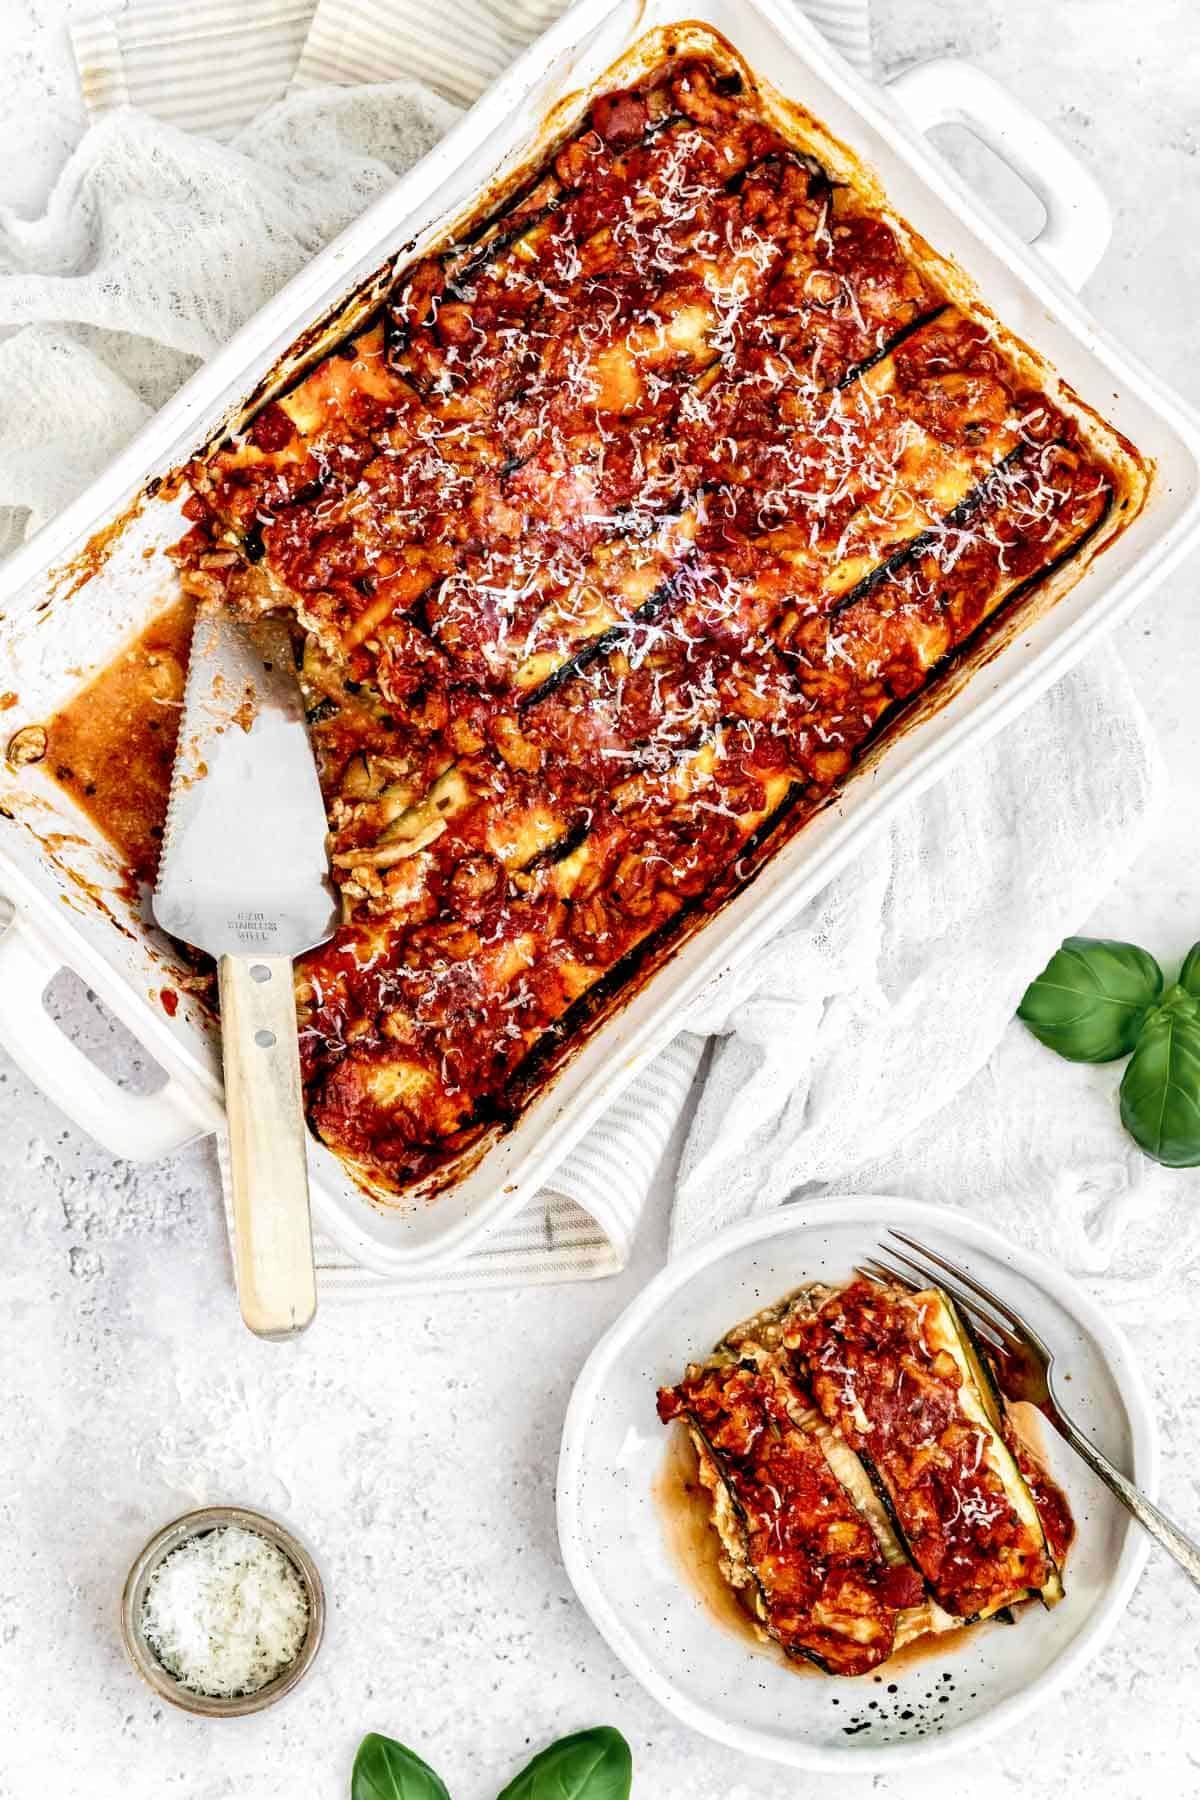 A slice of turkey vegetable lasagna on a plate next to a casserole dish and basil.